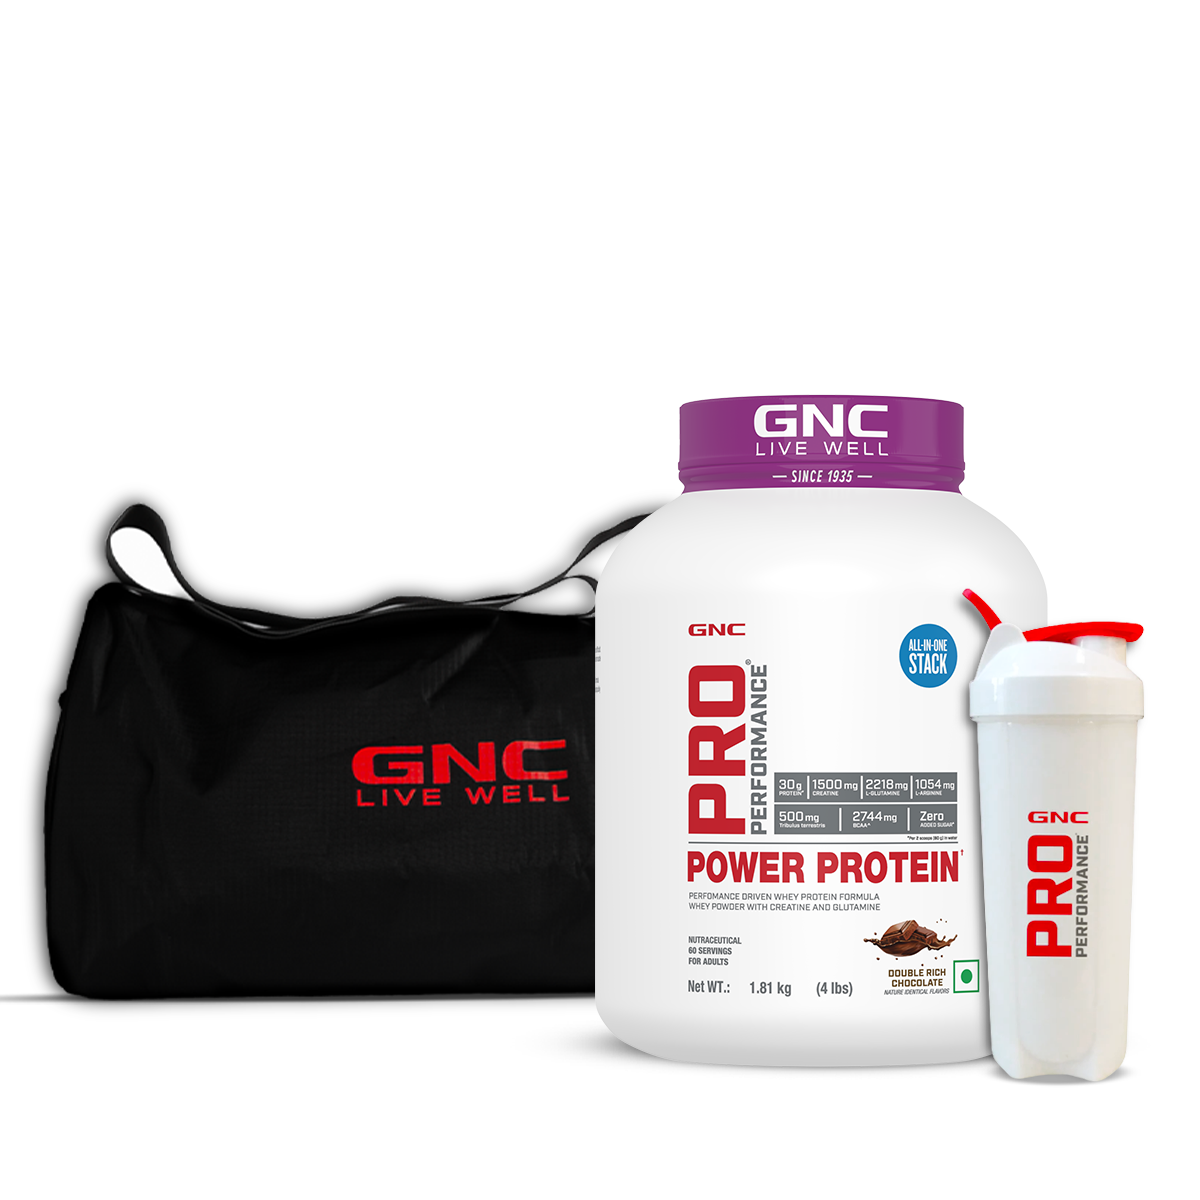 GymElite Performance Pack - |Power Protein with Gym Bag & Shaker | 6 in 1 Muscle Stack for Strength, Recovery, & Muscle Mass | Speeds Up Recovery